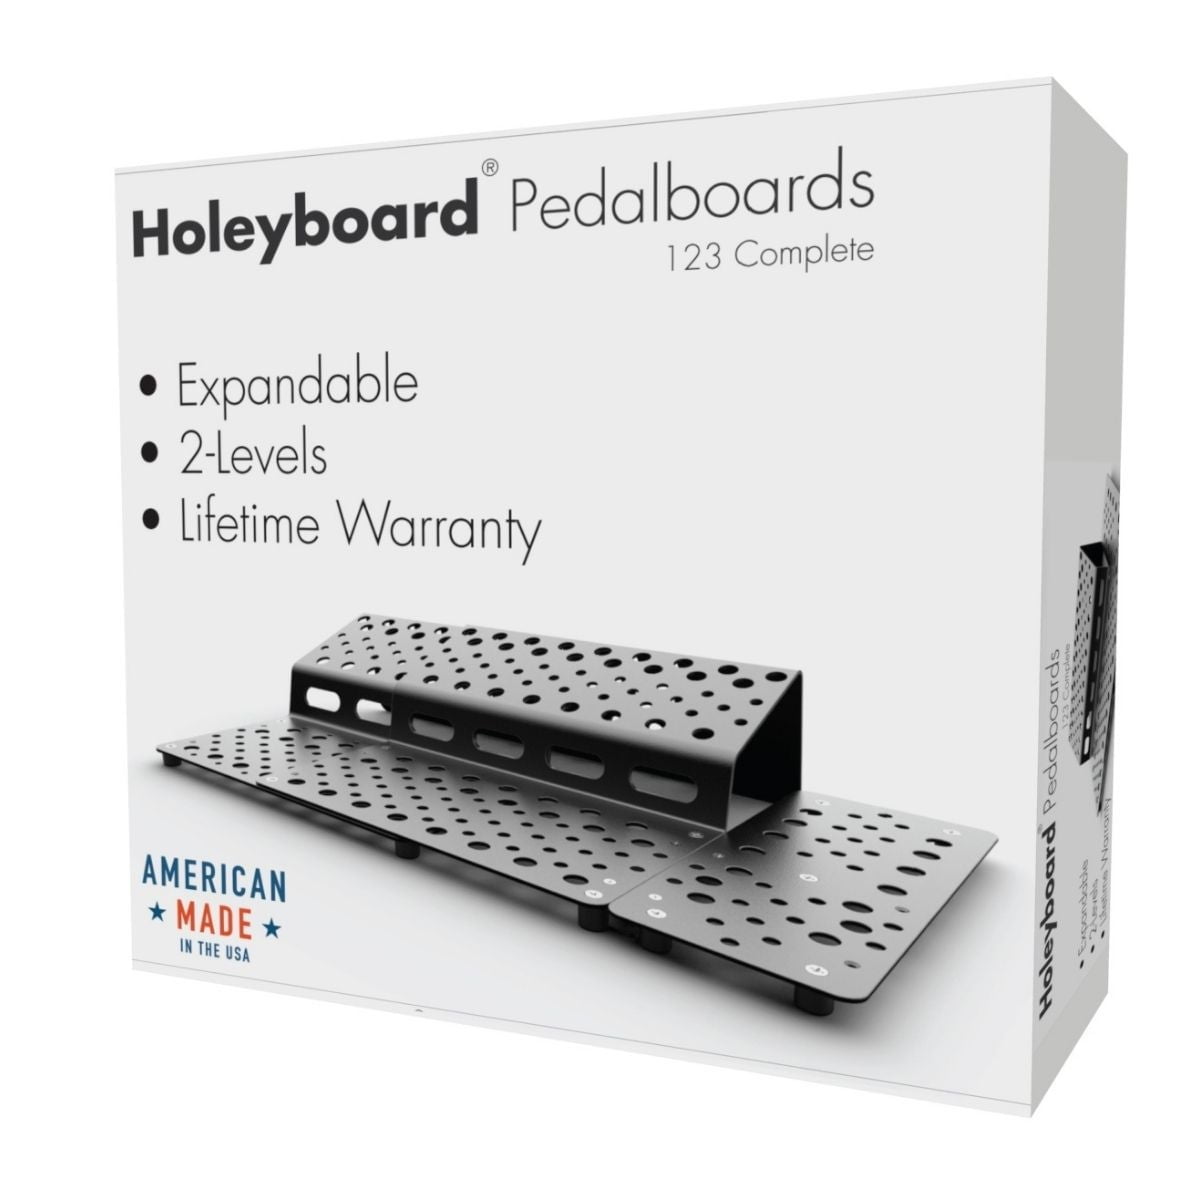 The 123 Complete Scratched Closeout - Holeyboard Pedalboards